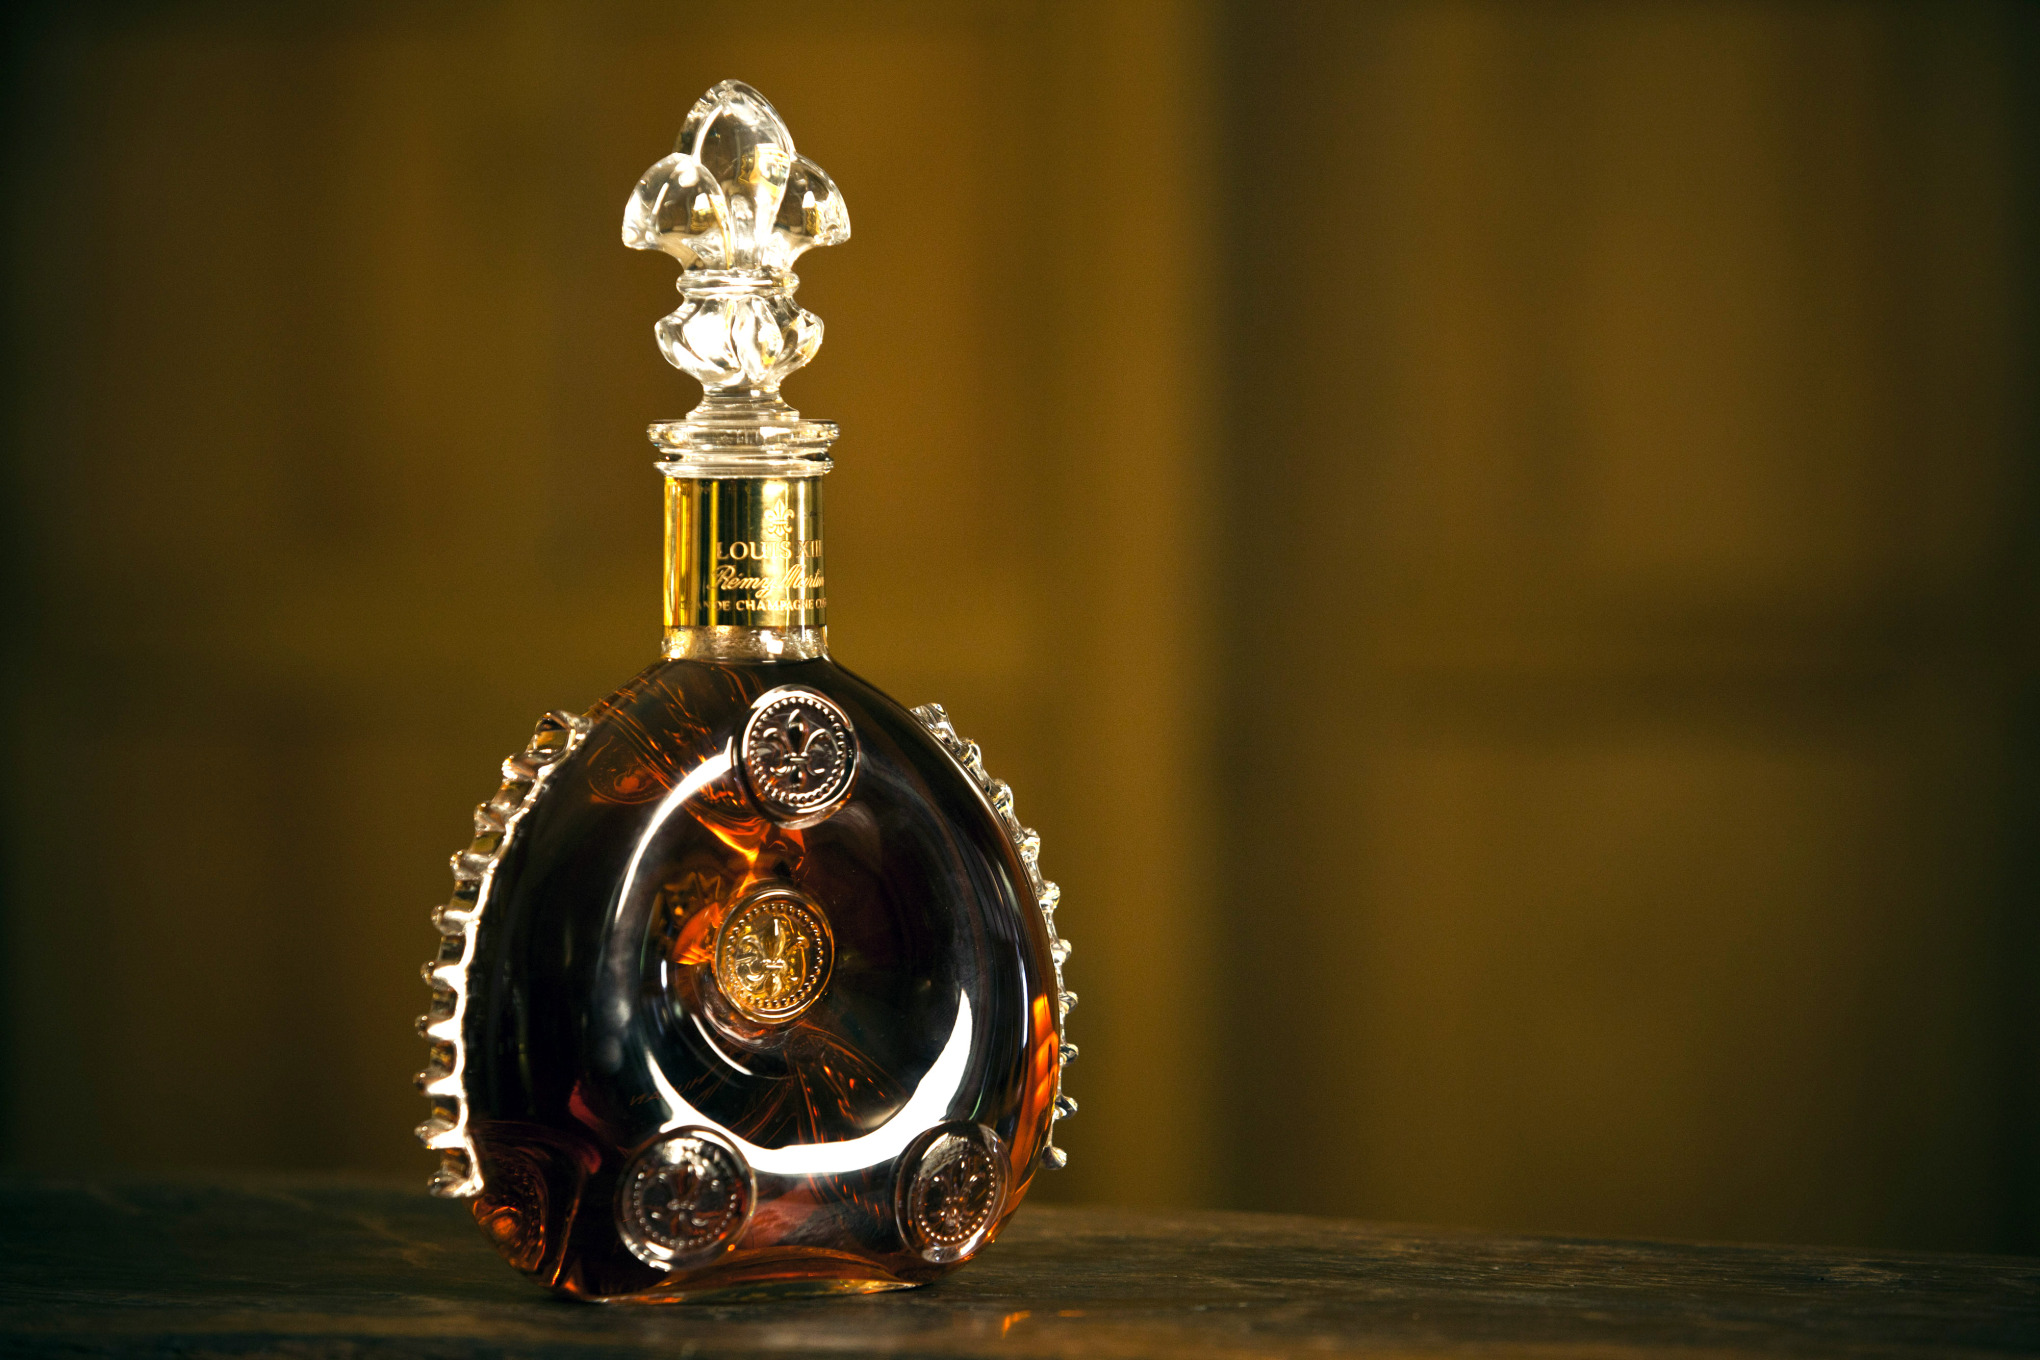 Cognac at Bumps New Against Shoppers\' - $4,000 Limits Luxury Up Bloomberg